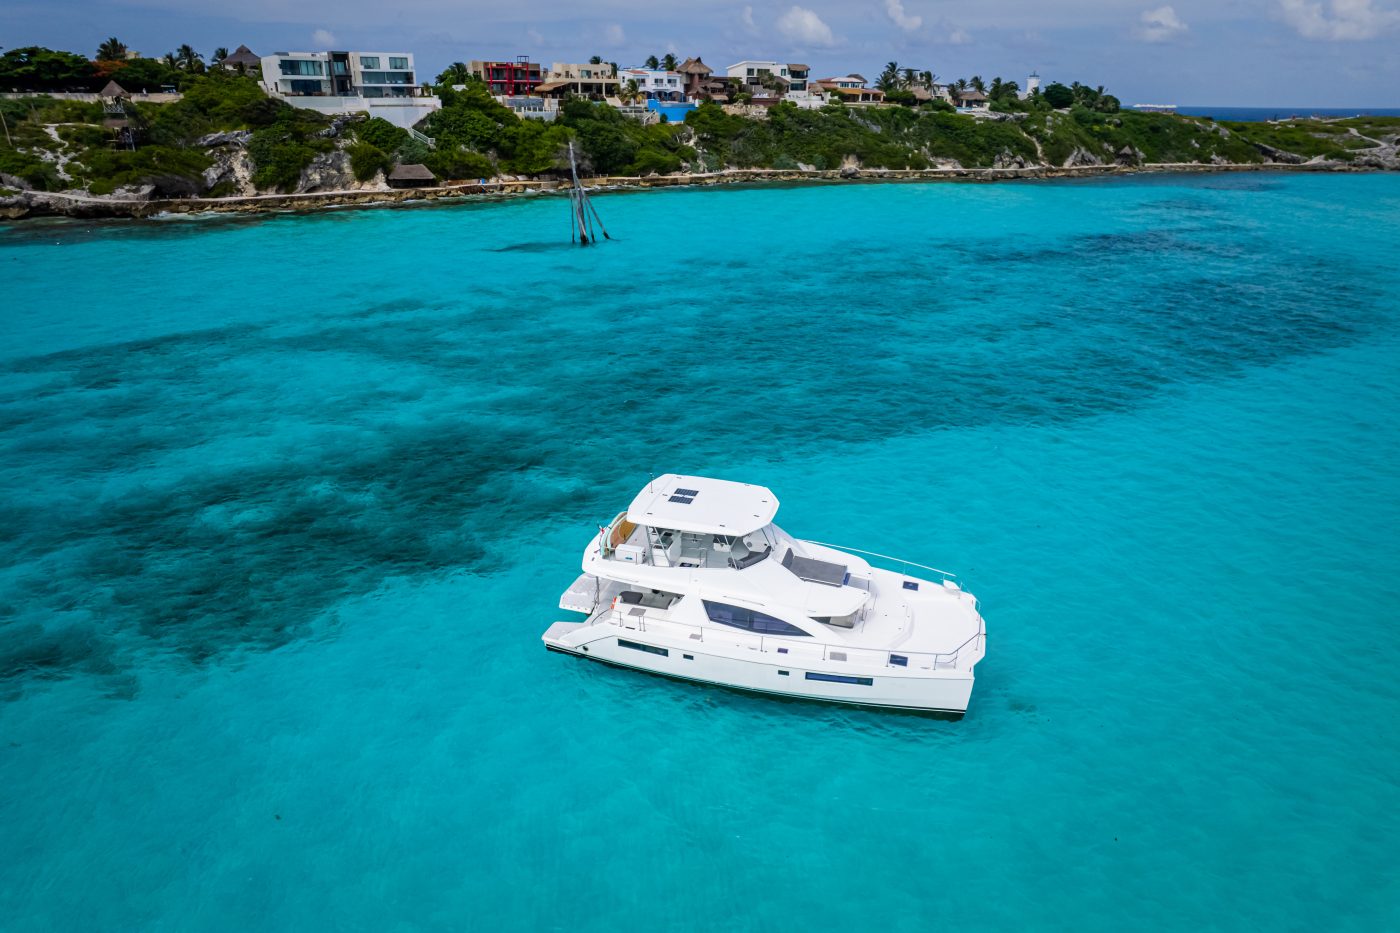 Leopard Catamaran for Luxury Yacht Charters and boat rentals Cancun